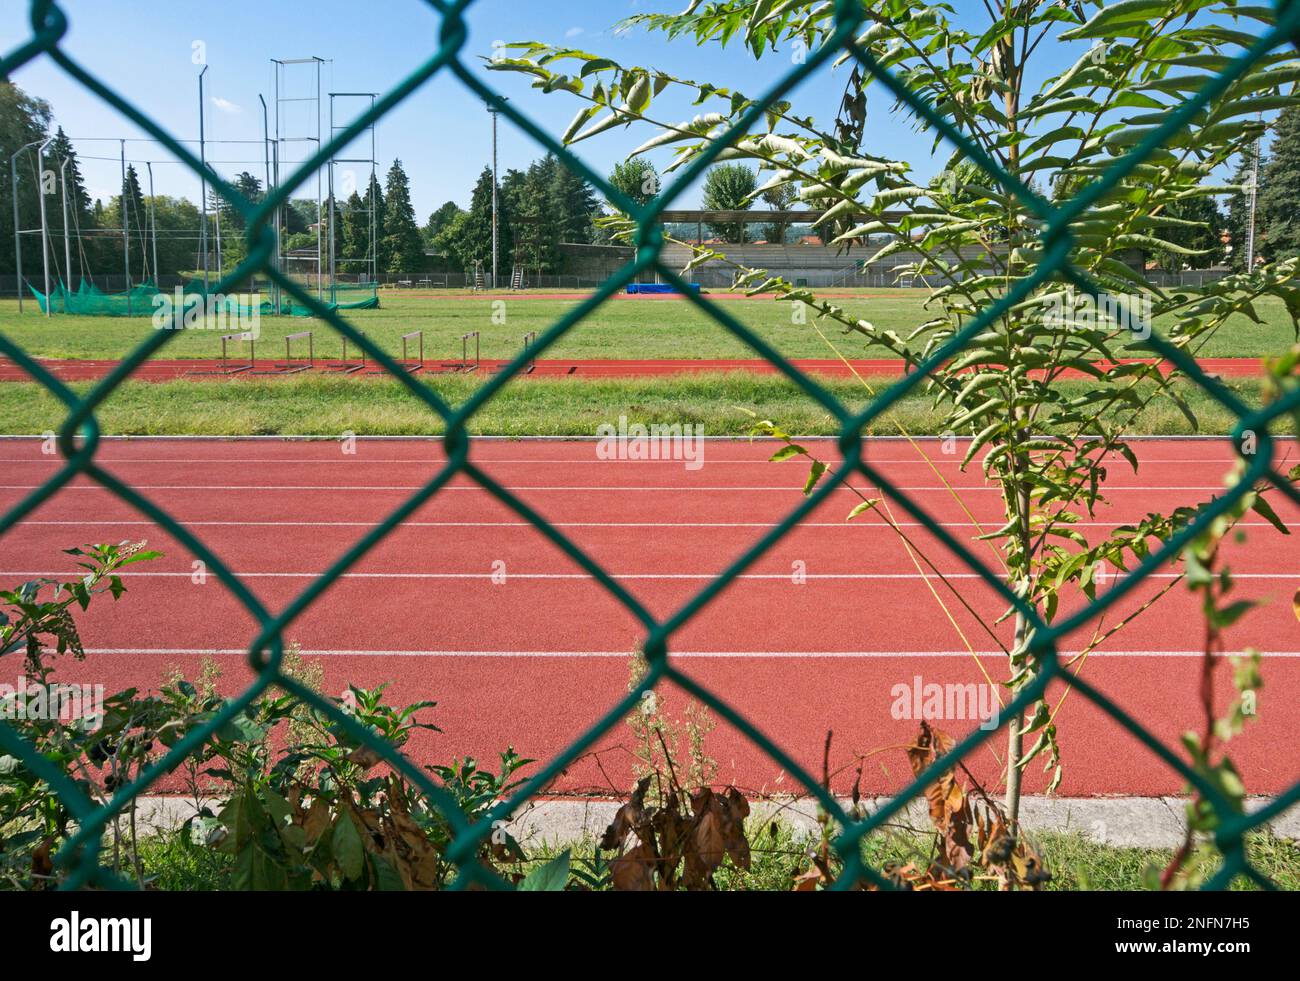 athletic track field through a fencing net Stock Photo